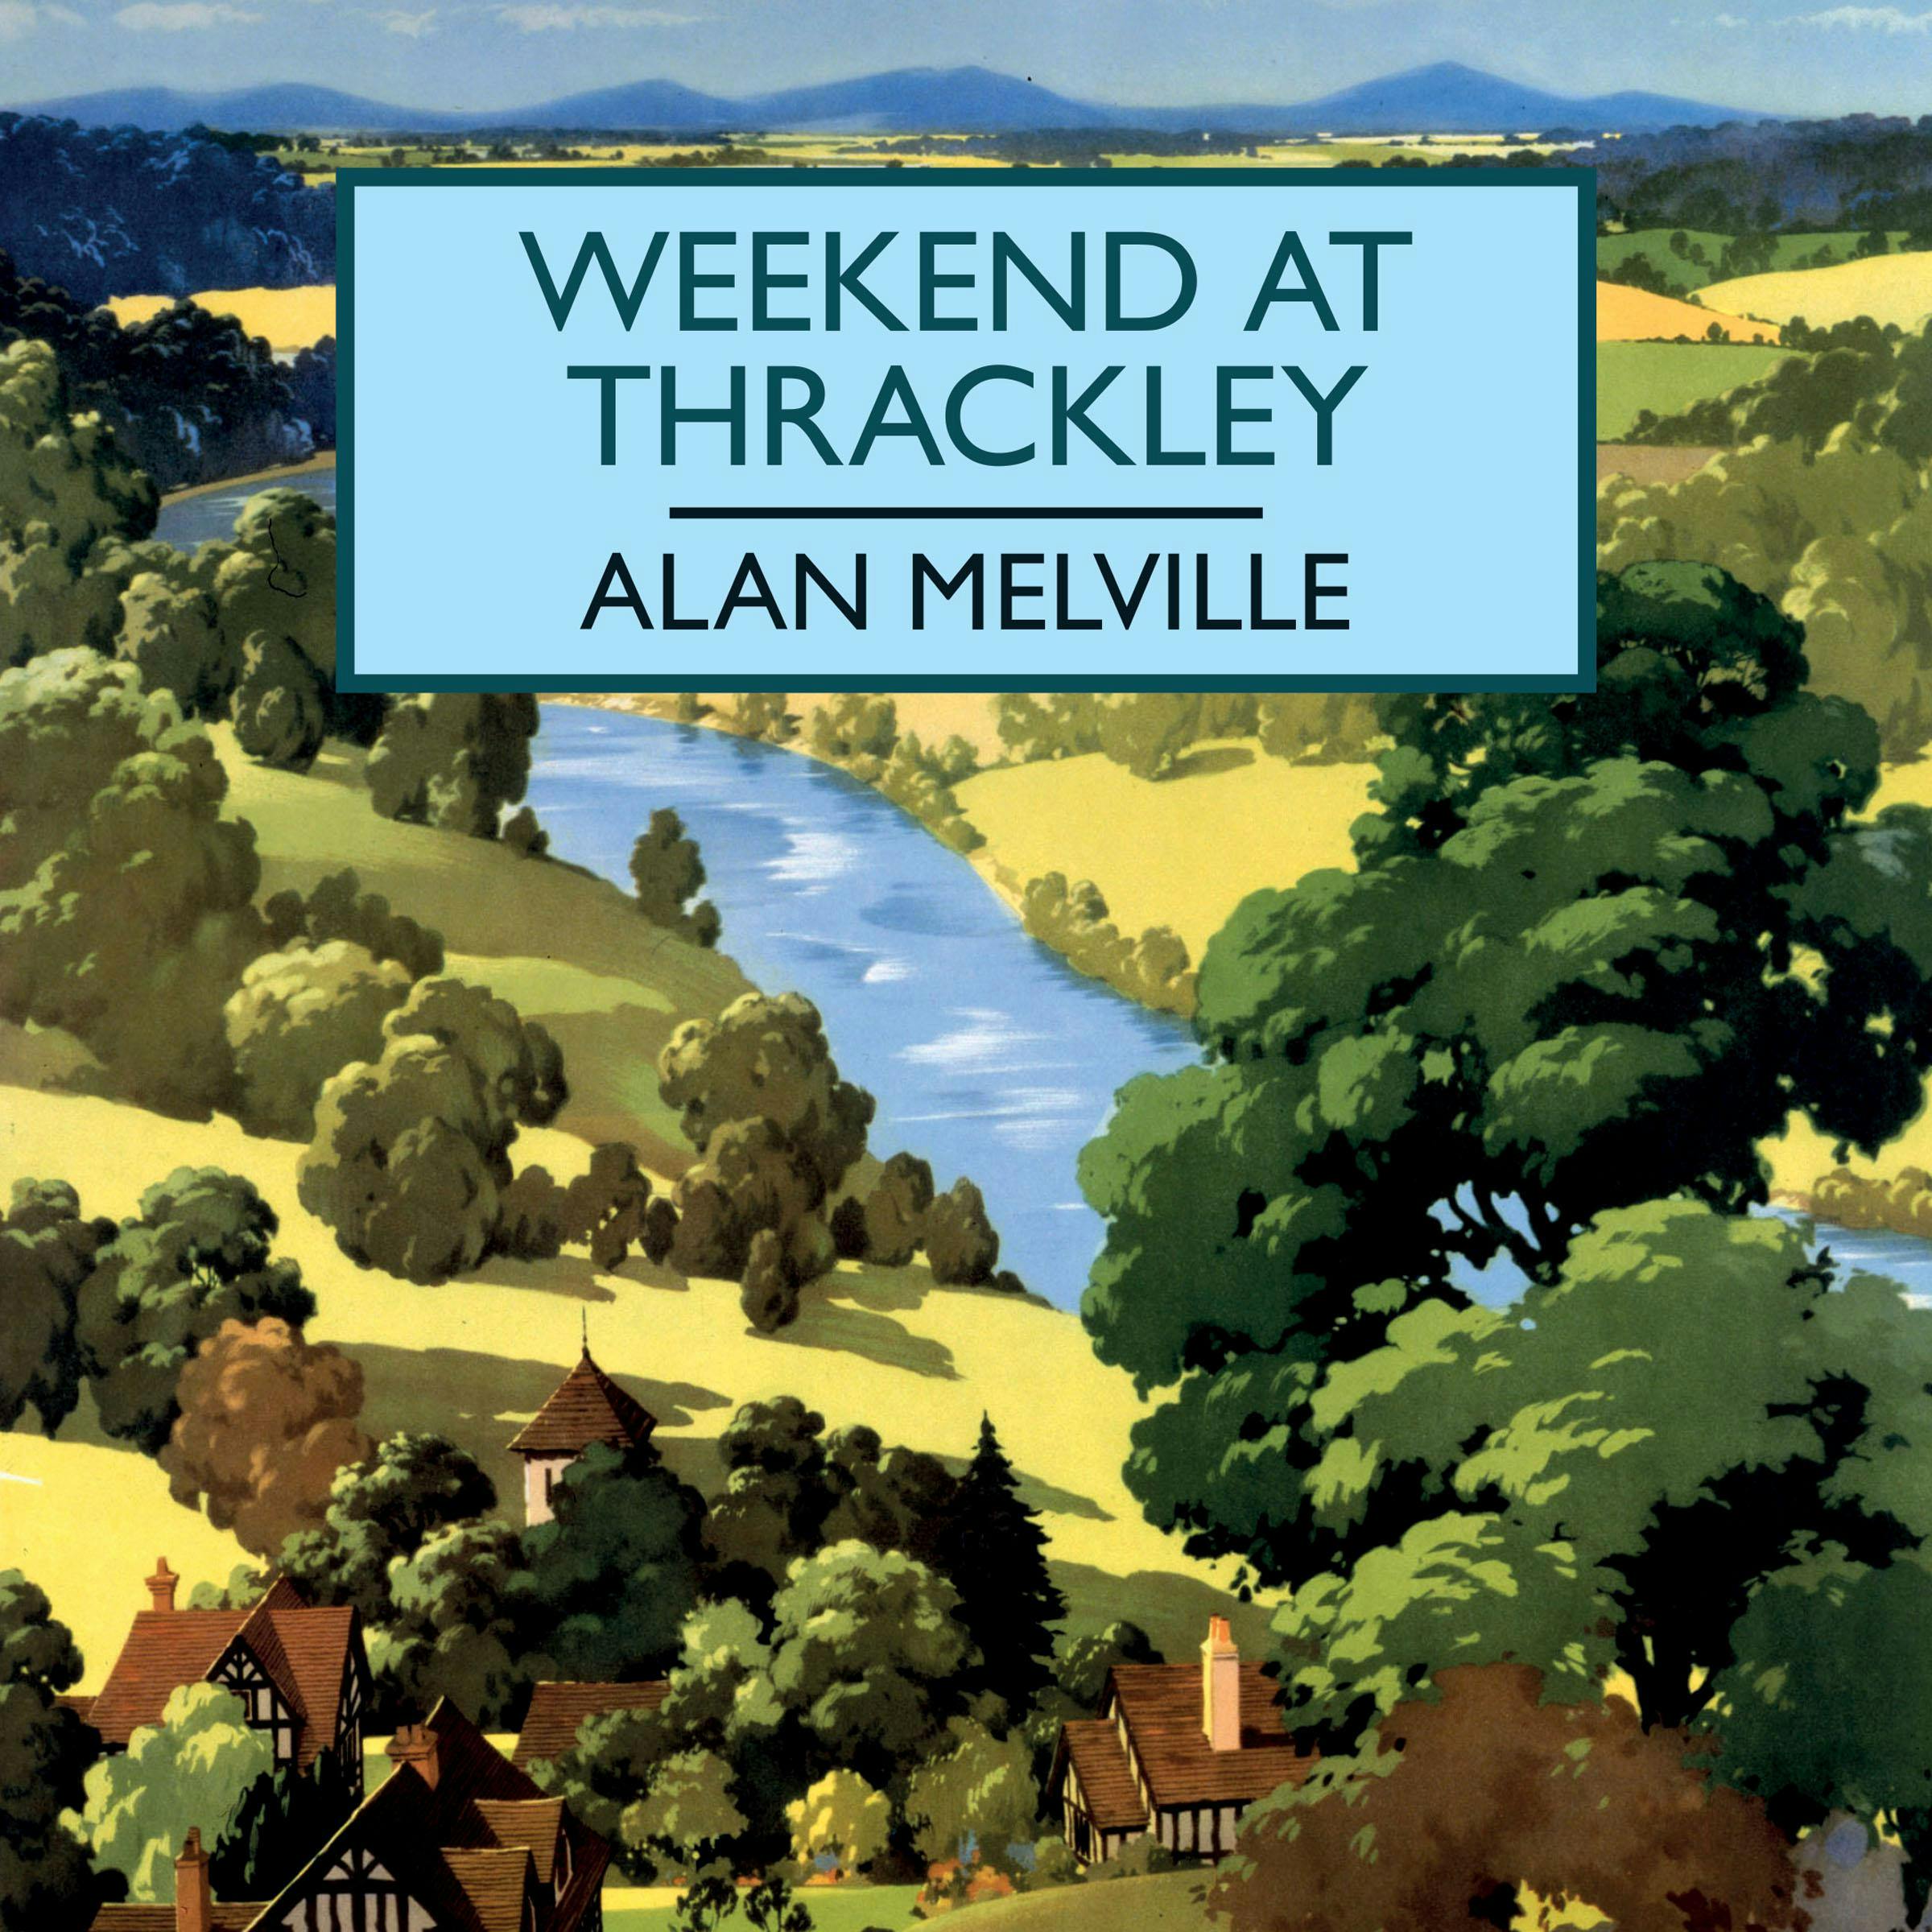 Weekend at Thrackley - Alan Melville